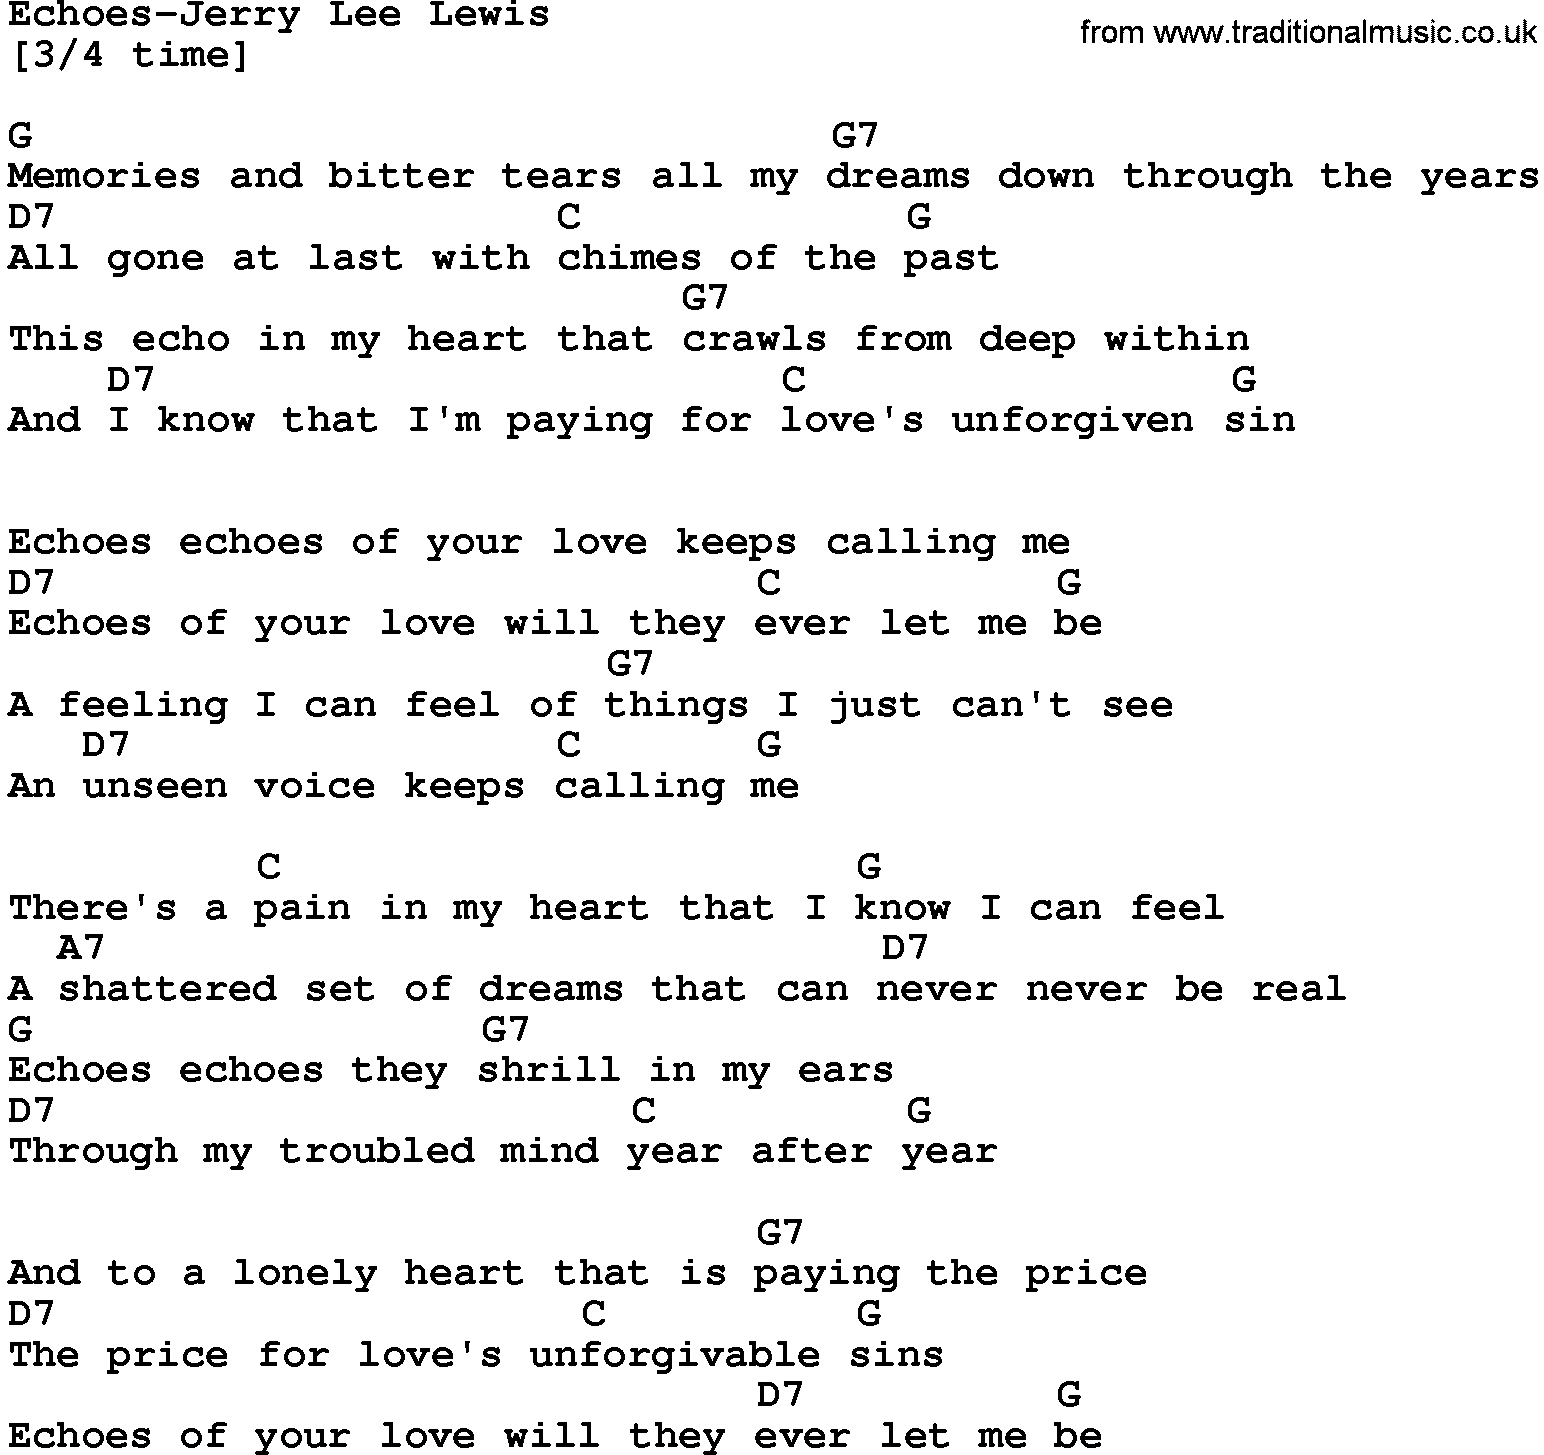 Country music song: Echoes-Jerry Lee Lewis lyrics and chords